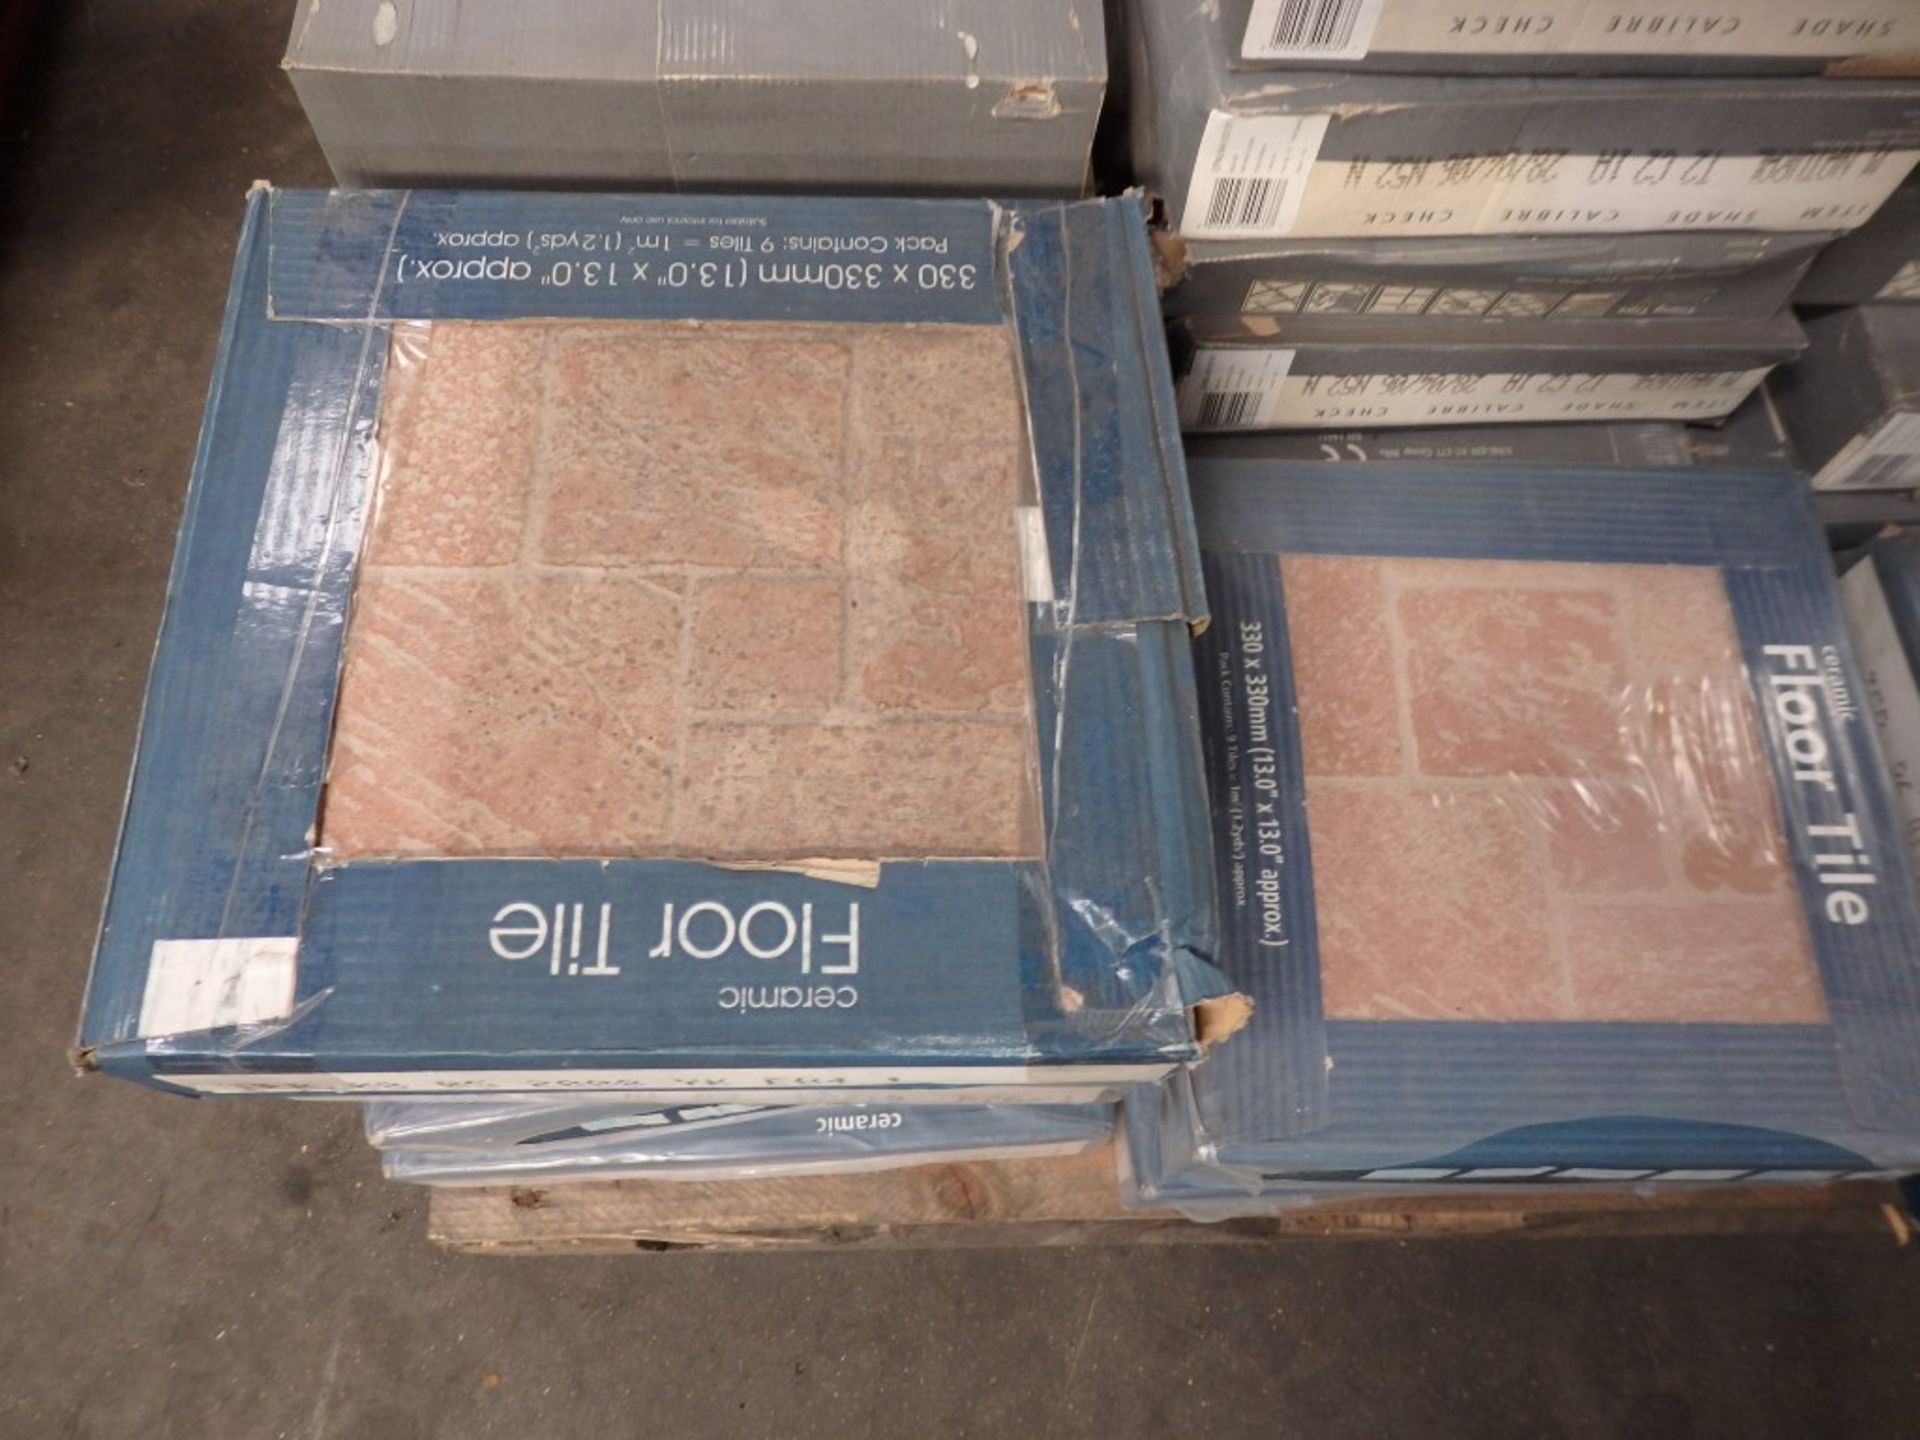 Approx 35 Boxes of Ceramic Floor Tiles - 330x330mm Floor Tiles - Each Pack Contains 9 Tiles - Ref - Image 2 of 4